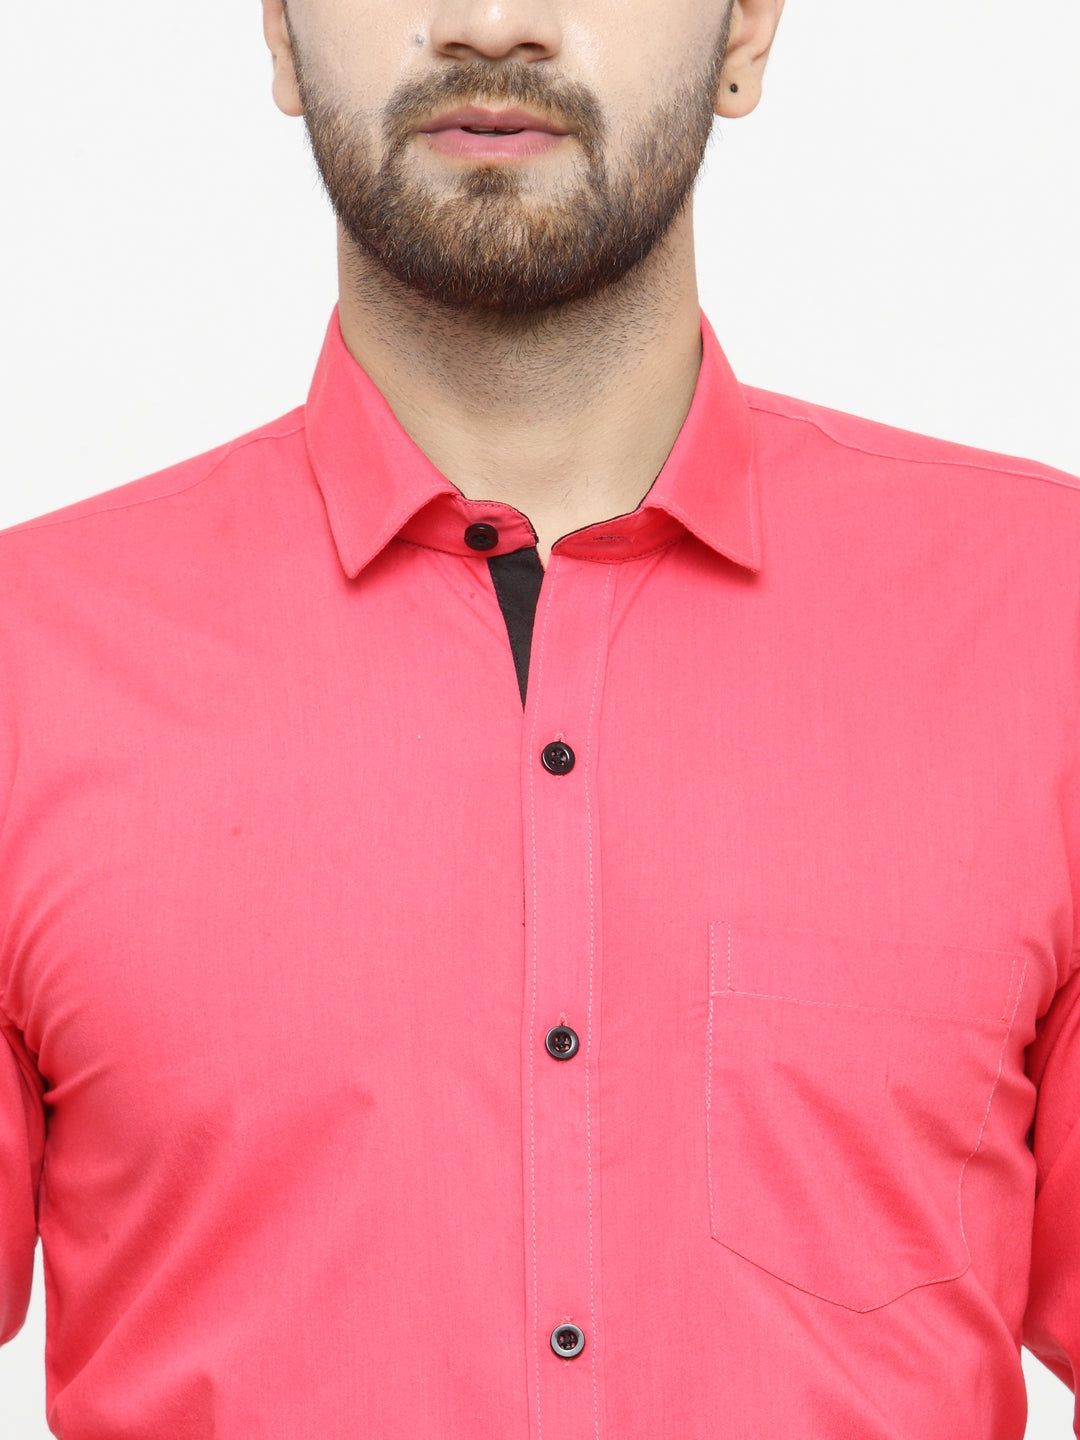 Men's Coral Red Formal Shirt with black detailing ( SF 411Coral ) - Jainish